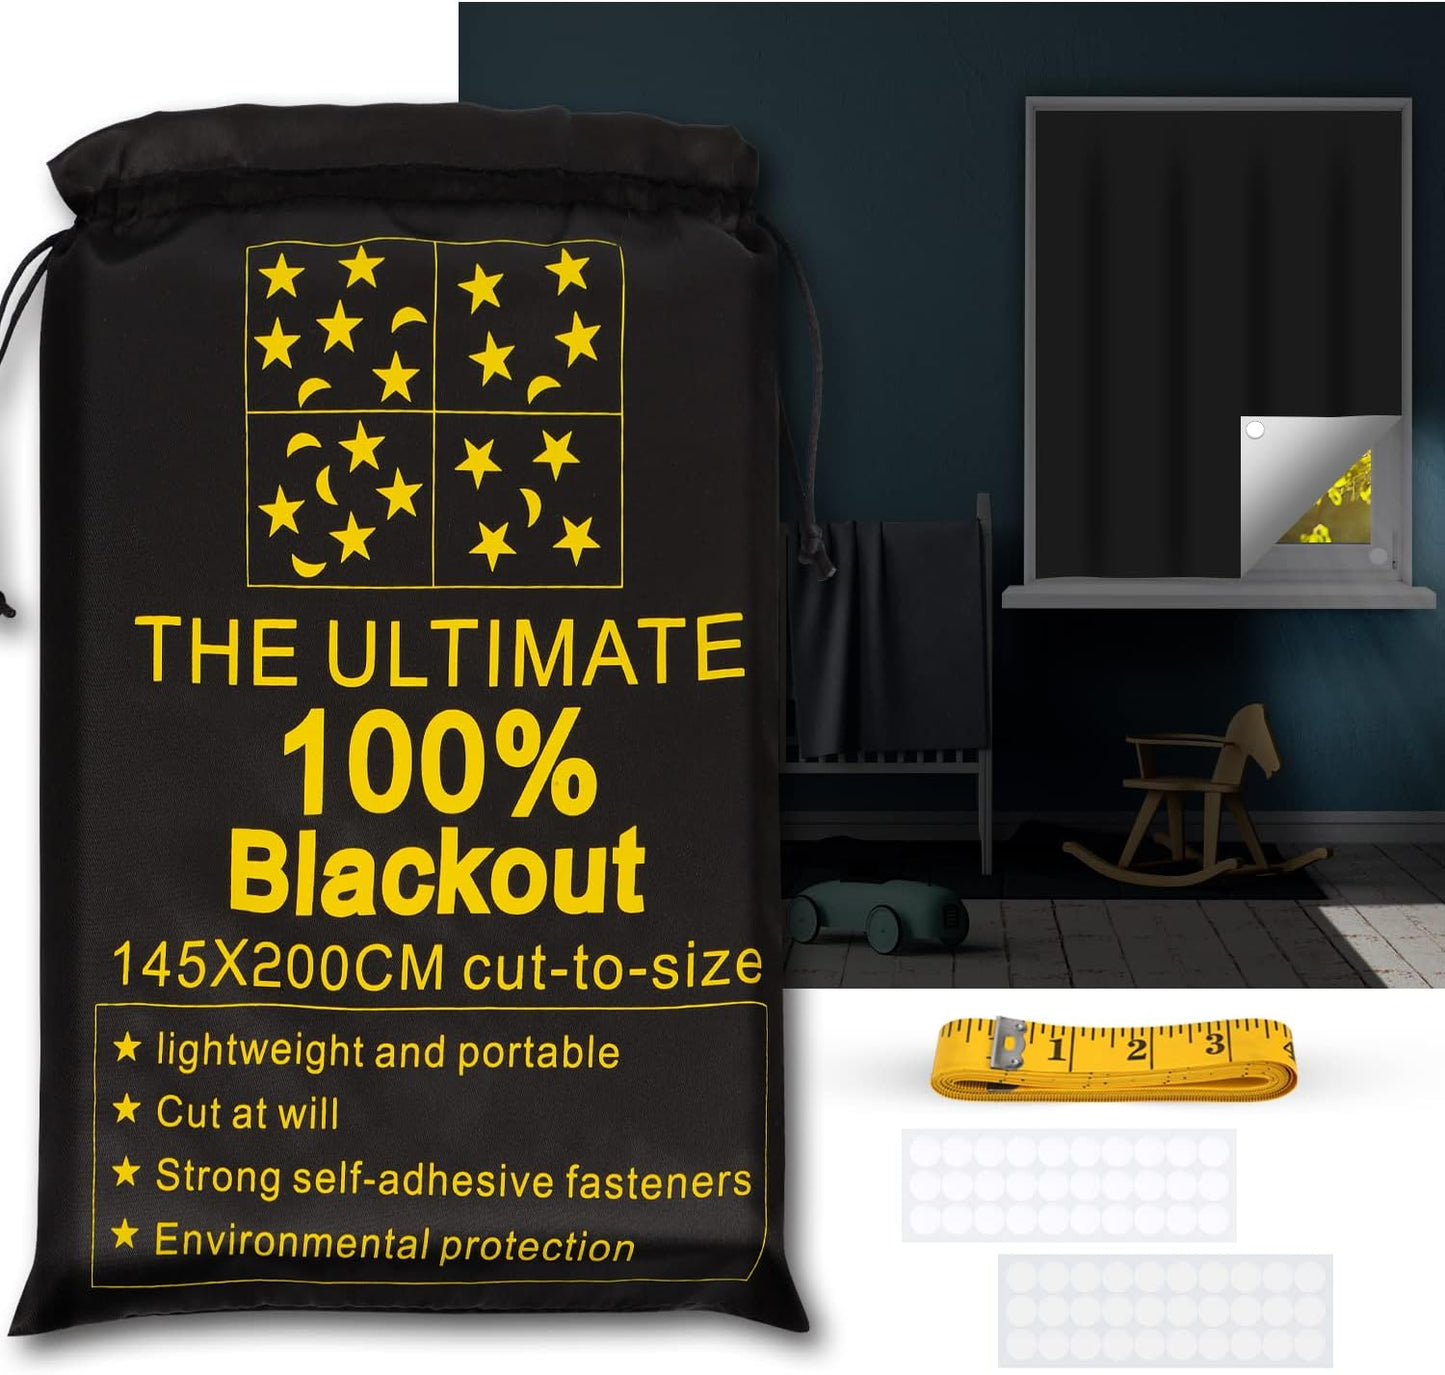 Portable Blackout Shades (118" X 57") 100% Blackout Material Temporary Blackout Blinds / Curtains for Baby Nursery, Bedroom, Window, Dorm Room, Office or Travel Use  ULIGOOD 79" X 57"  